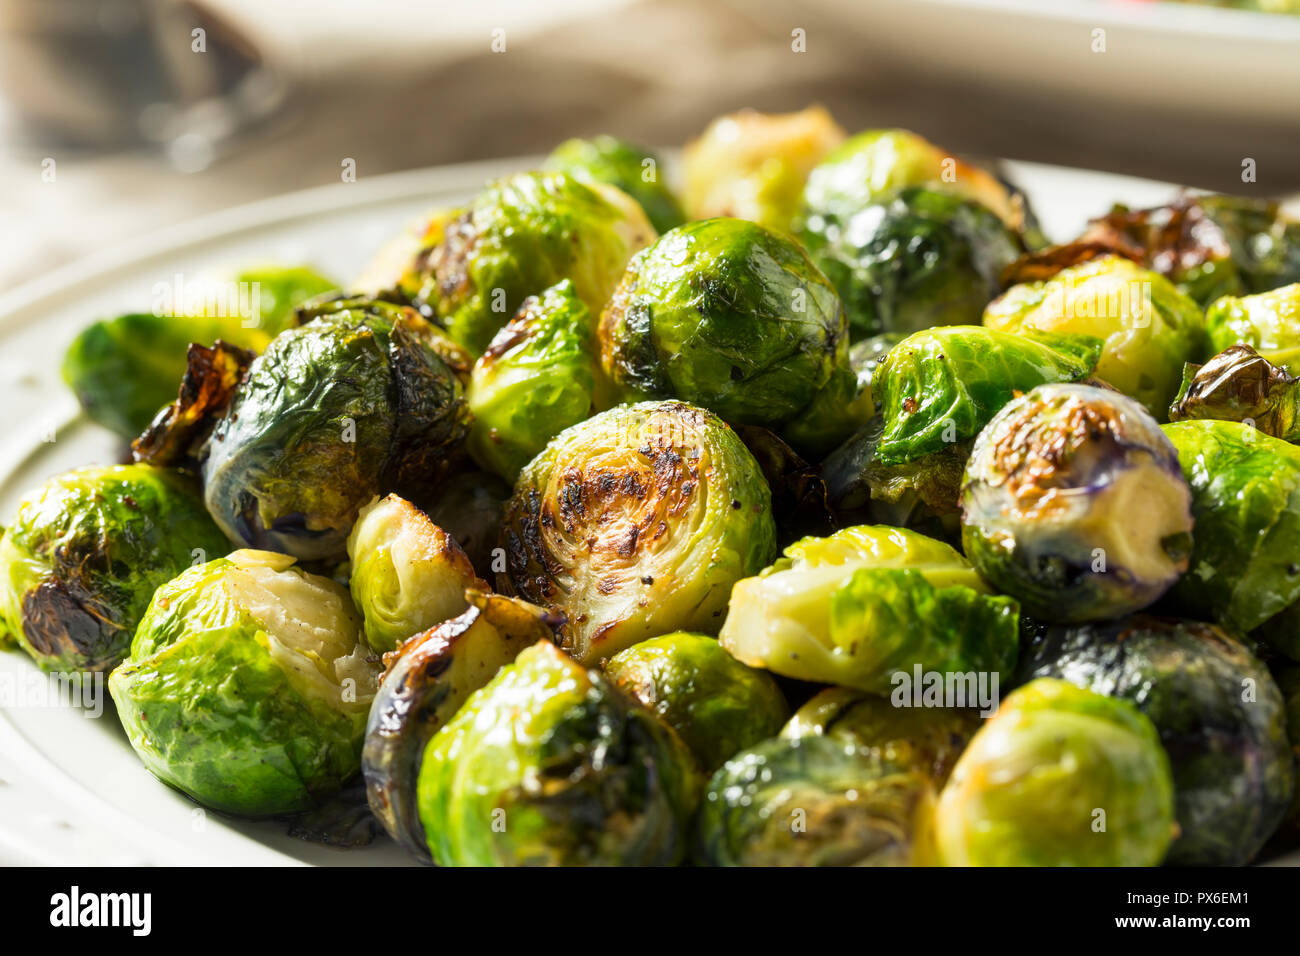 Healthy Roasted Brussel Sprouts for Thanksgiving Dinner Stock Photo